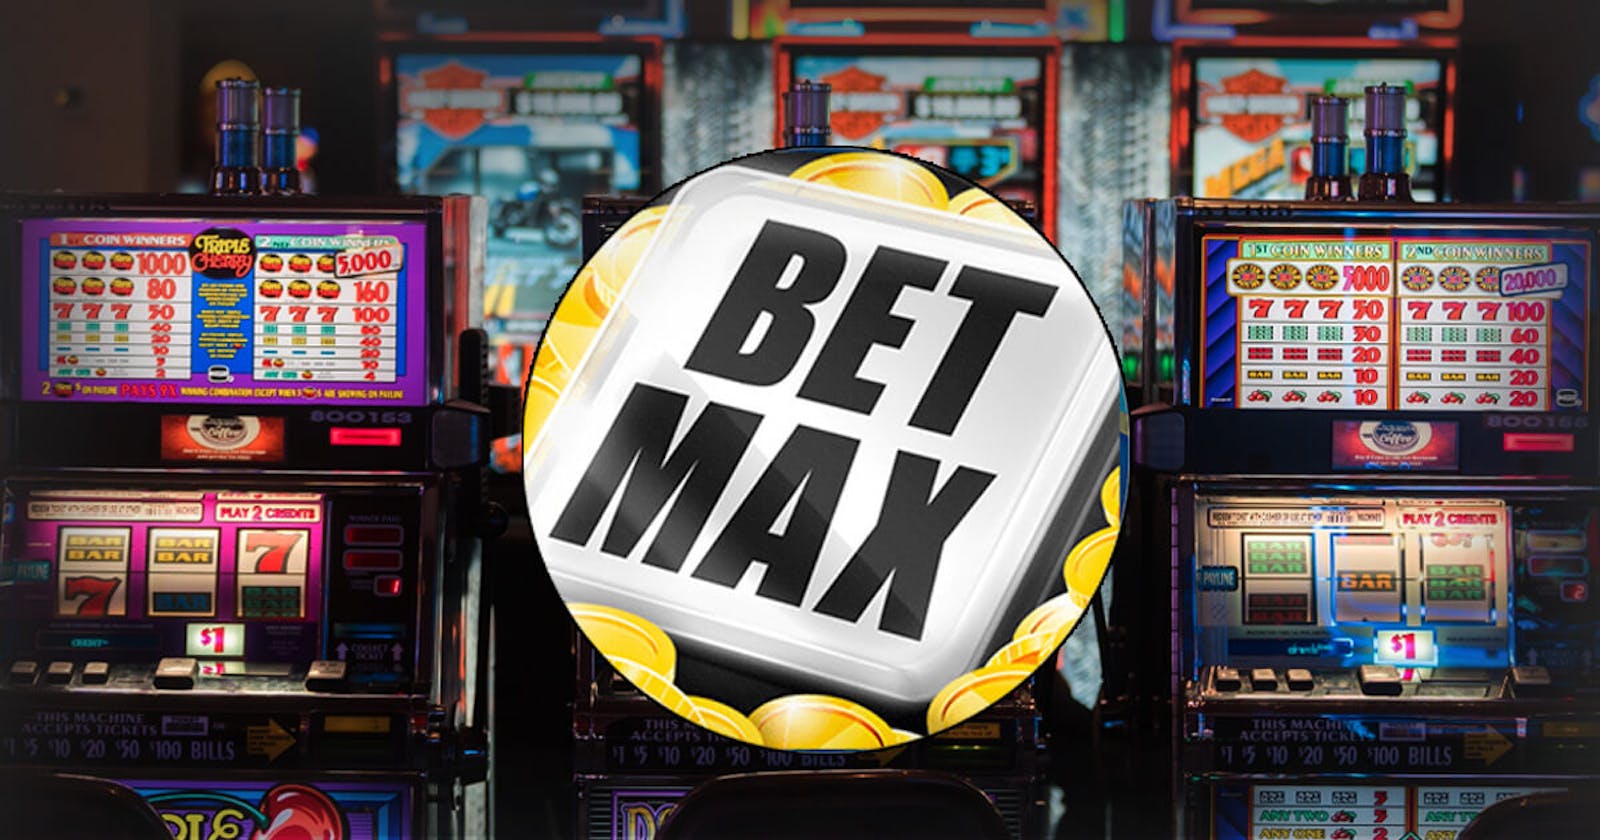 Pennies with Punch: 5 Reasons Why Should You Play Max Bet on Penny Slots